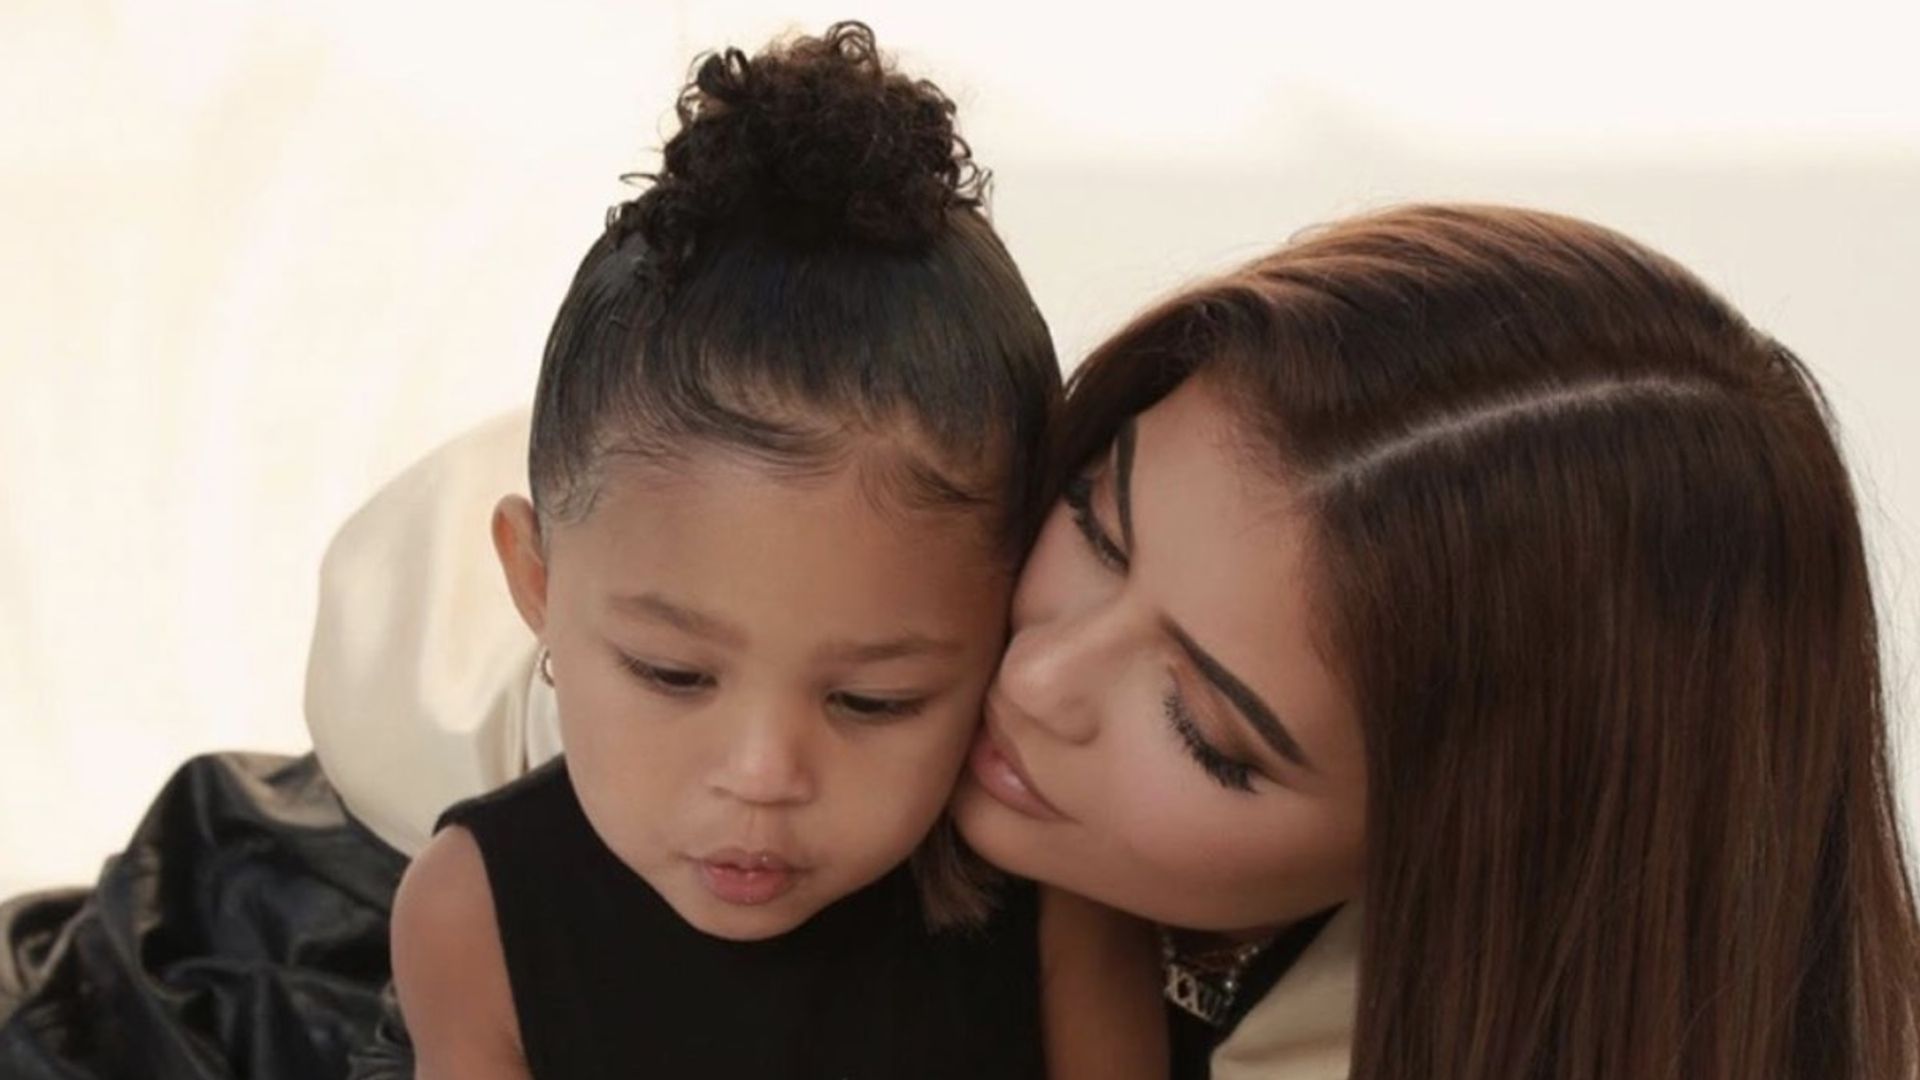 Kylie Jenner shares rare photos of Stormi from family’s lockdown holiday